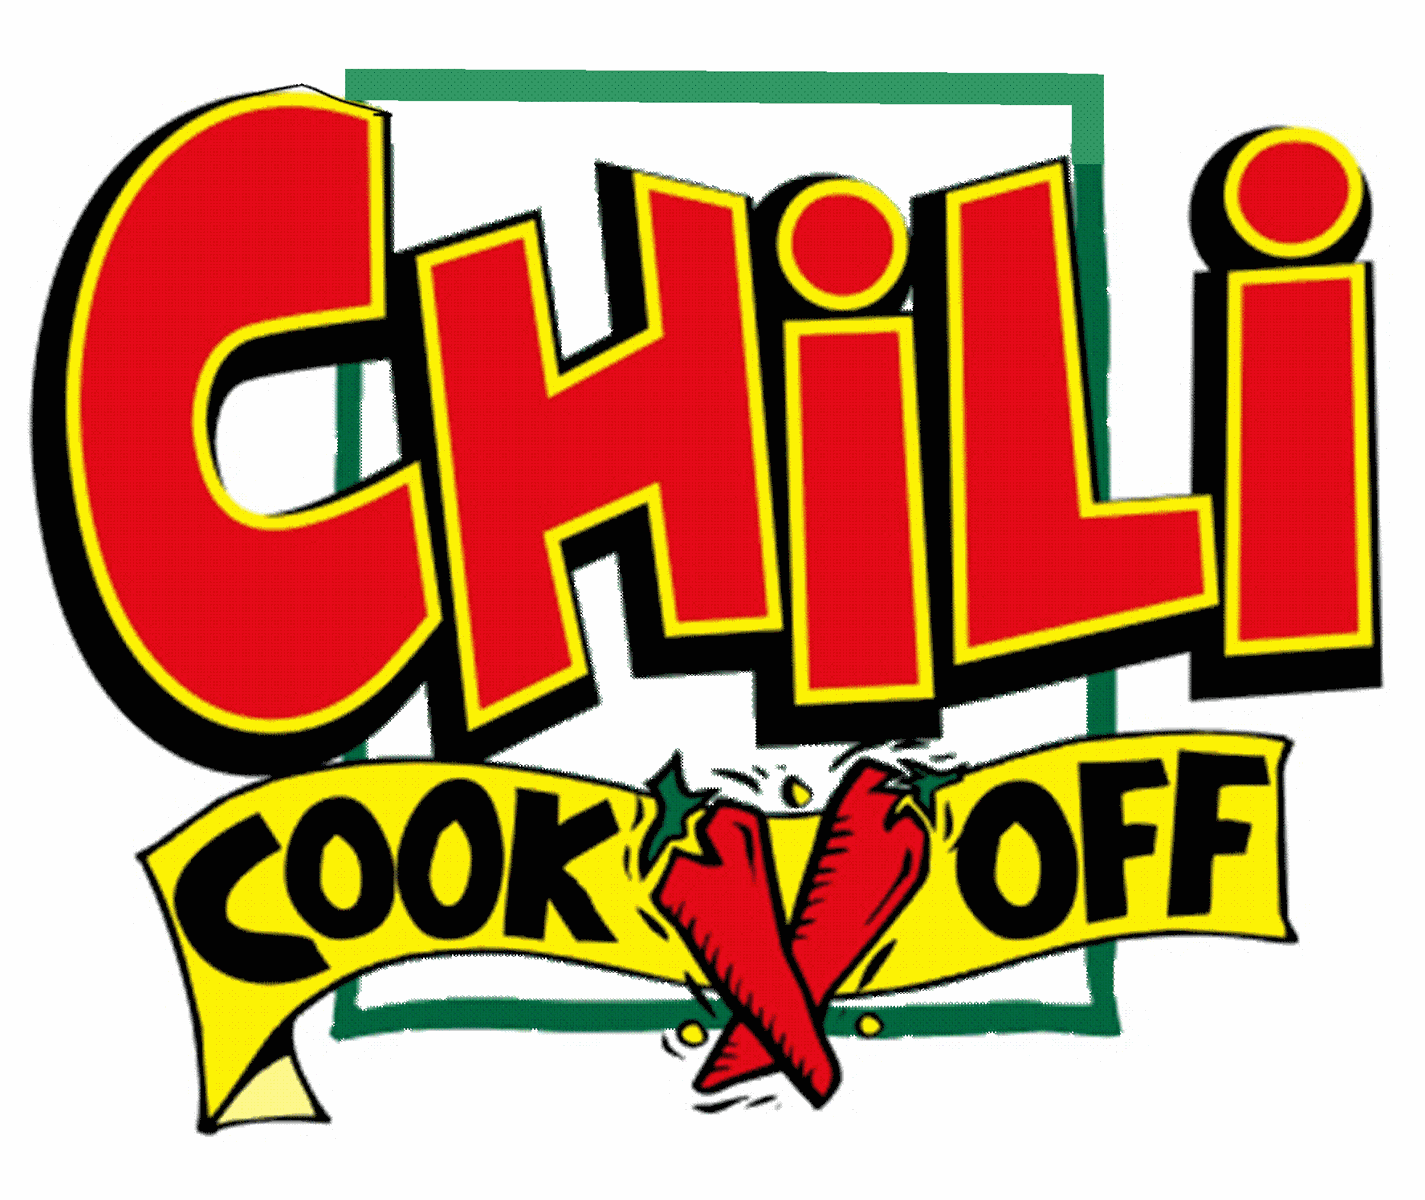 chili cook off 2018 - Clip Art Library